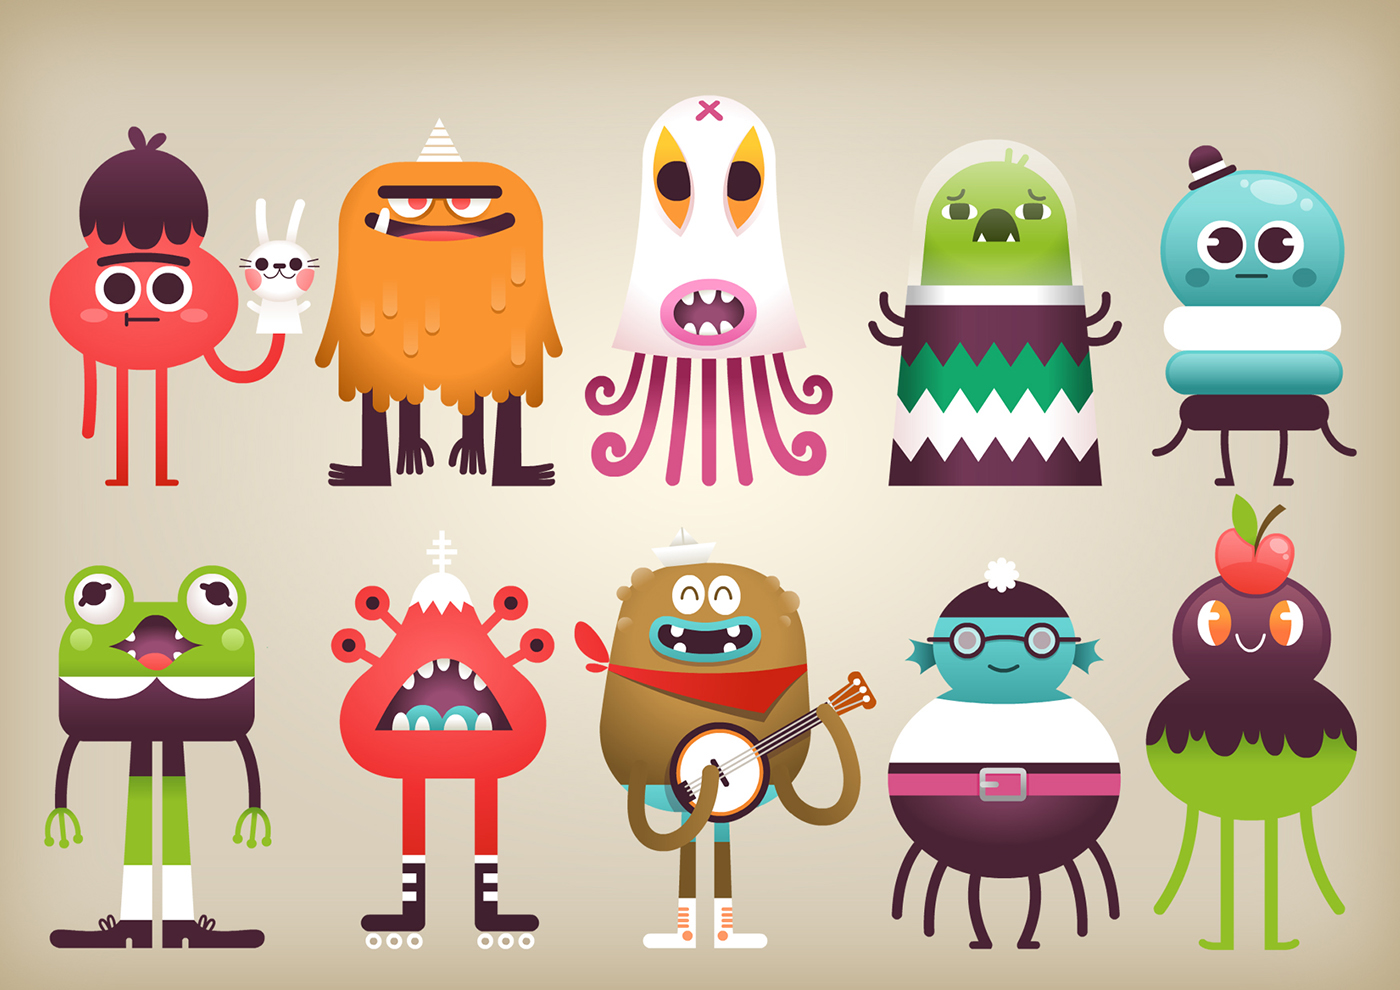 ILLUSTRATION  characterdesign Videogames monsters graphic Appdesign